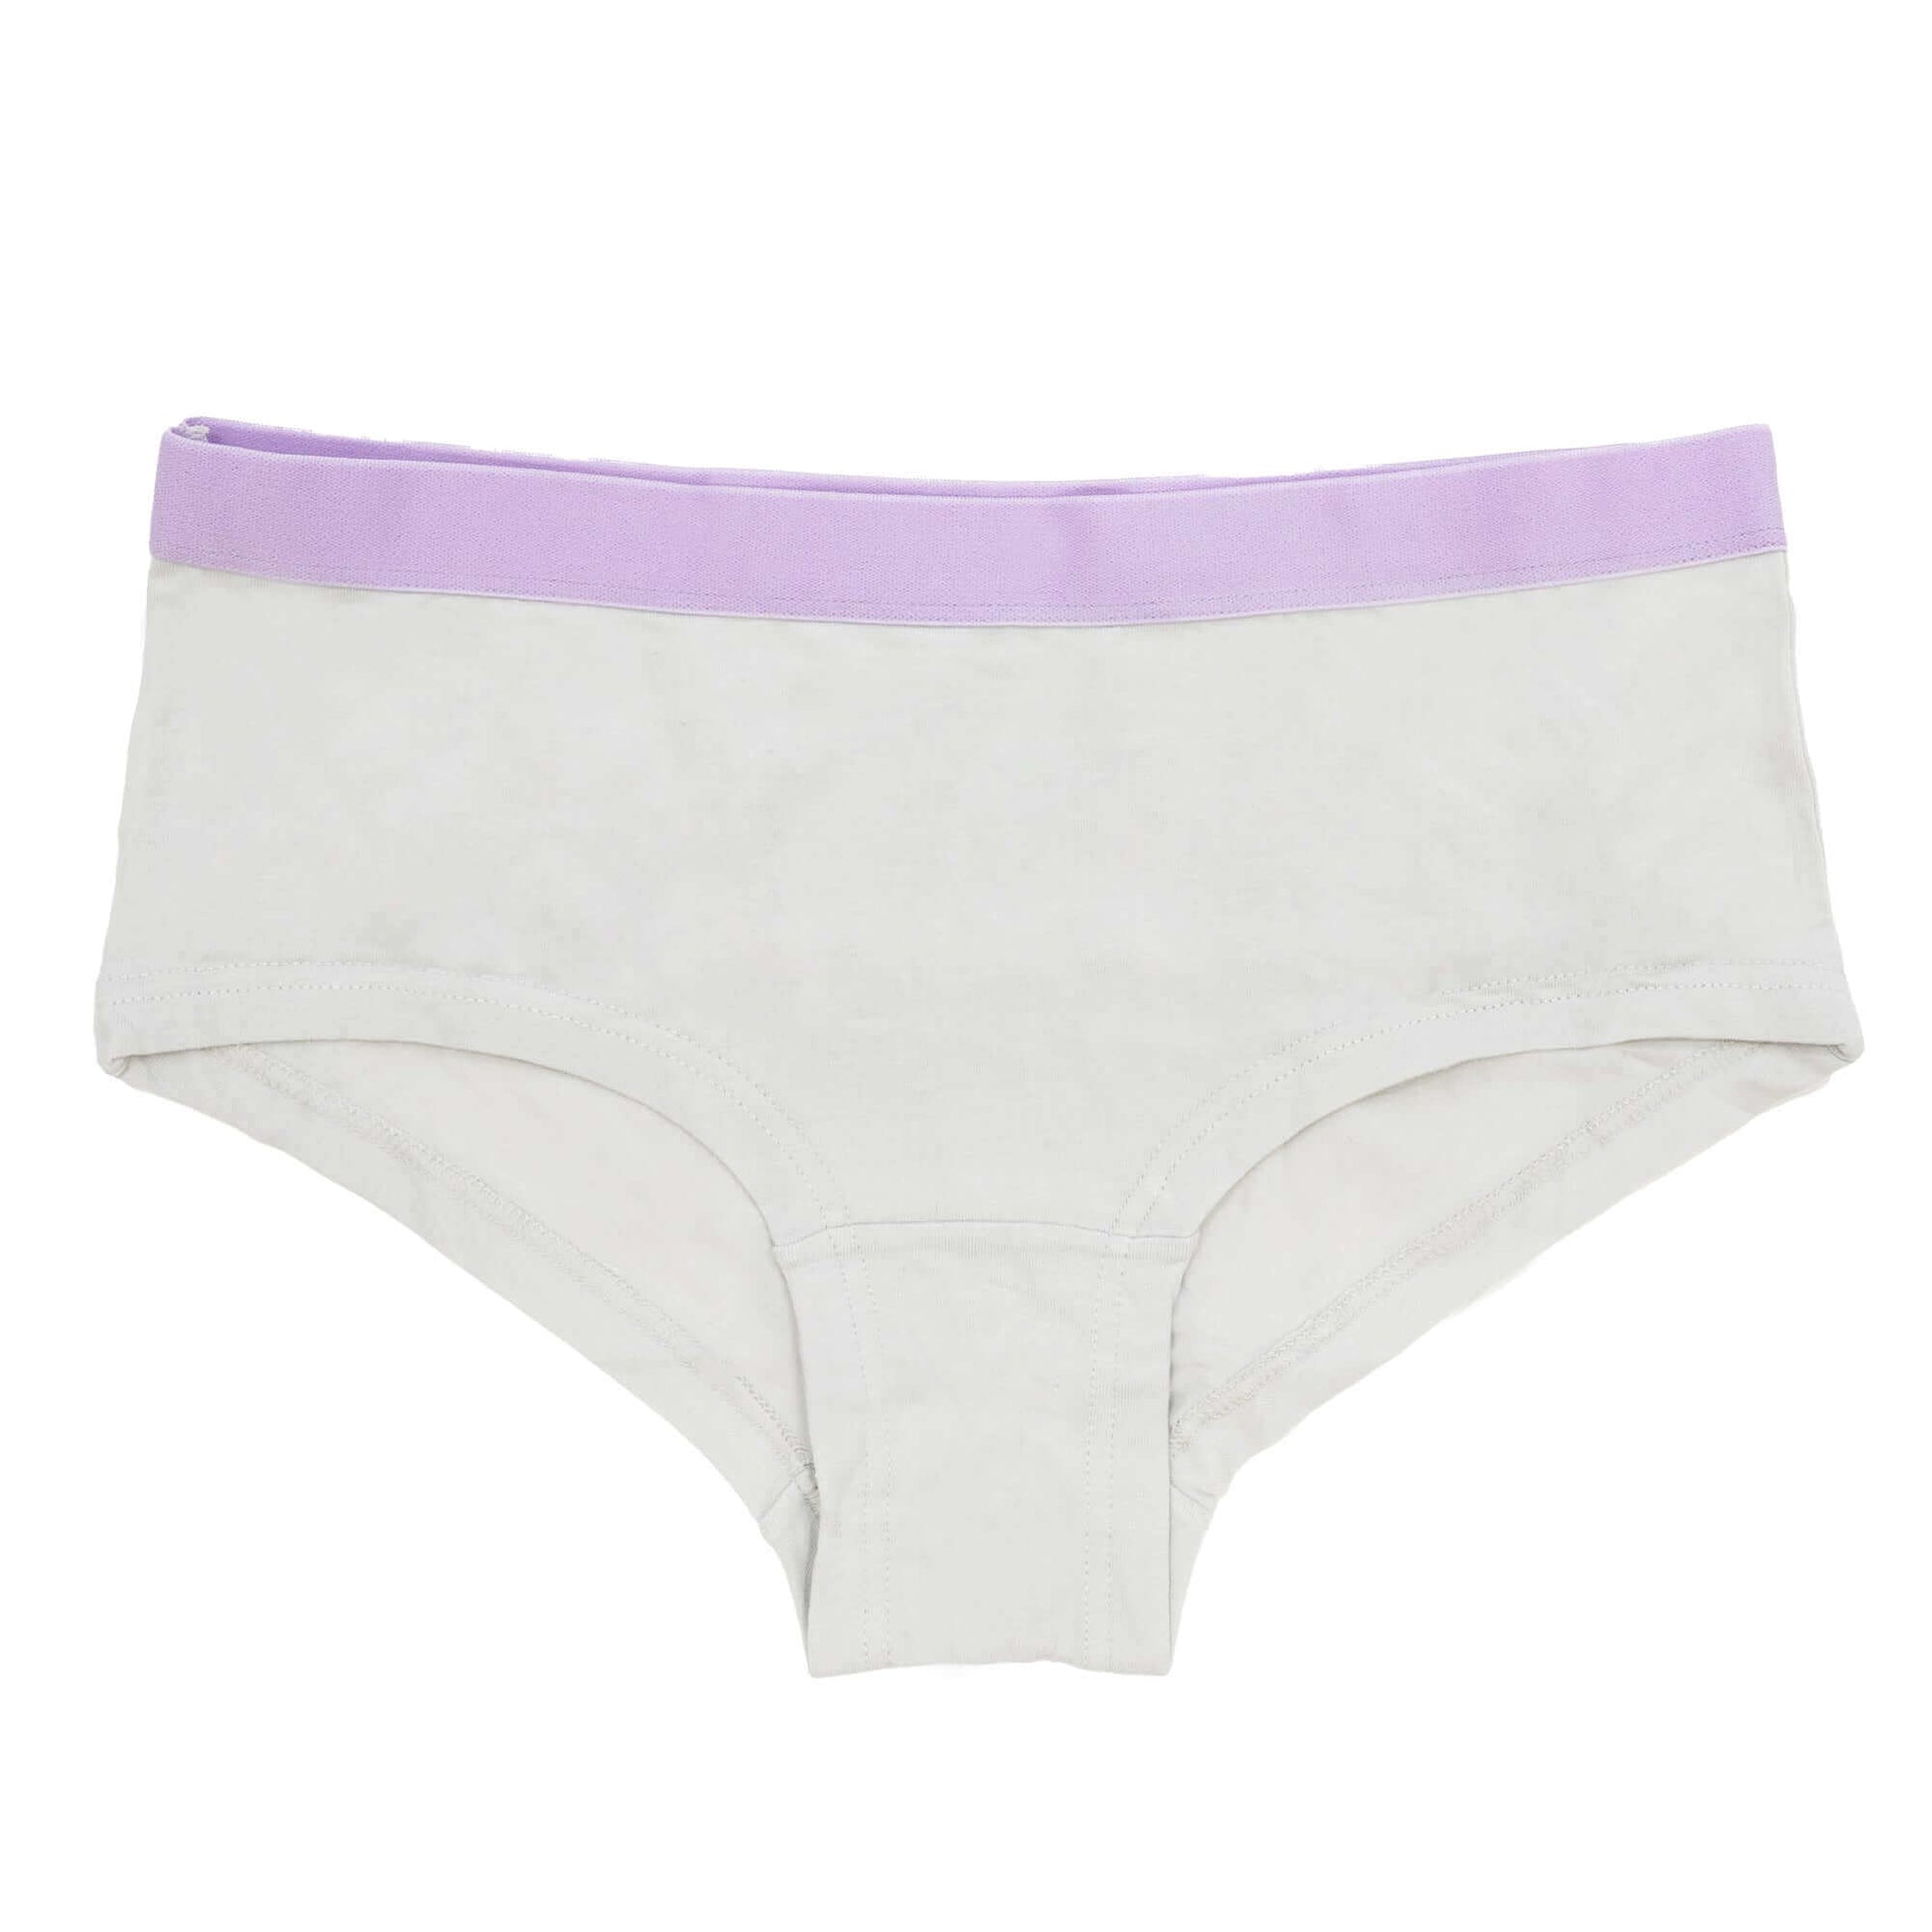 Pack of 5 Girls Underwear Briefs, Soft Cotton Comfort Fit Perfect for Everyday Wear. Buy now for £8.00. A Underwear by Daisy Dreamer. 11-12, 13-14, 15-16, 9-10, black, bottom, breathable, briefs, childrens, comfortable, cosy, cotton, girls, ladies, leopar